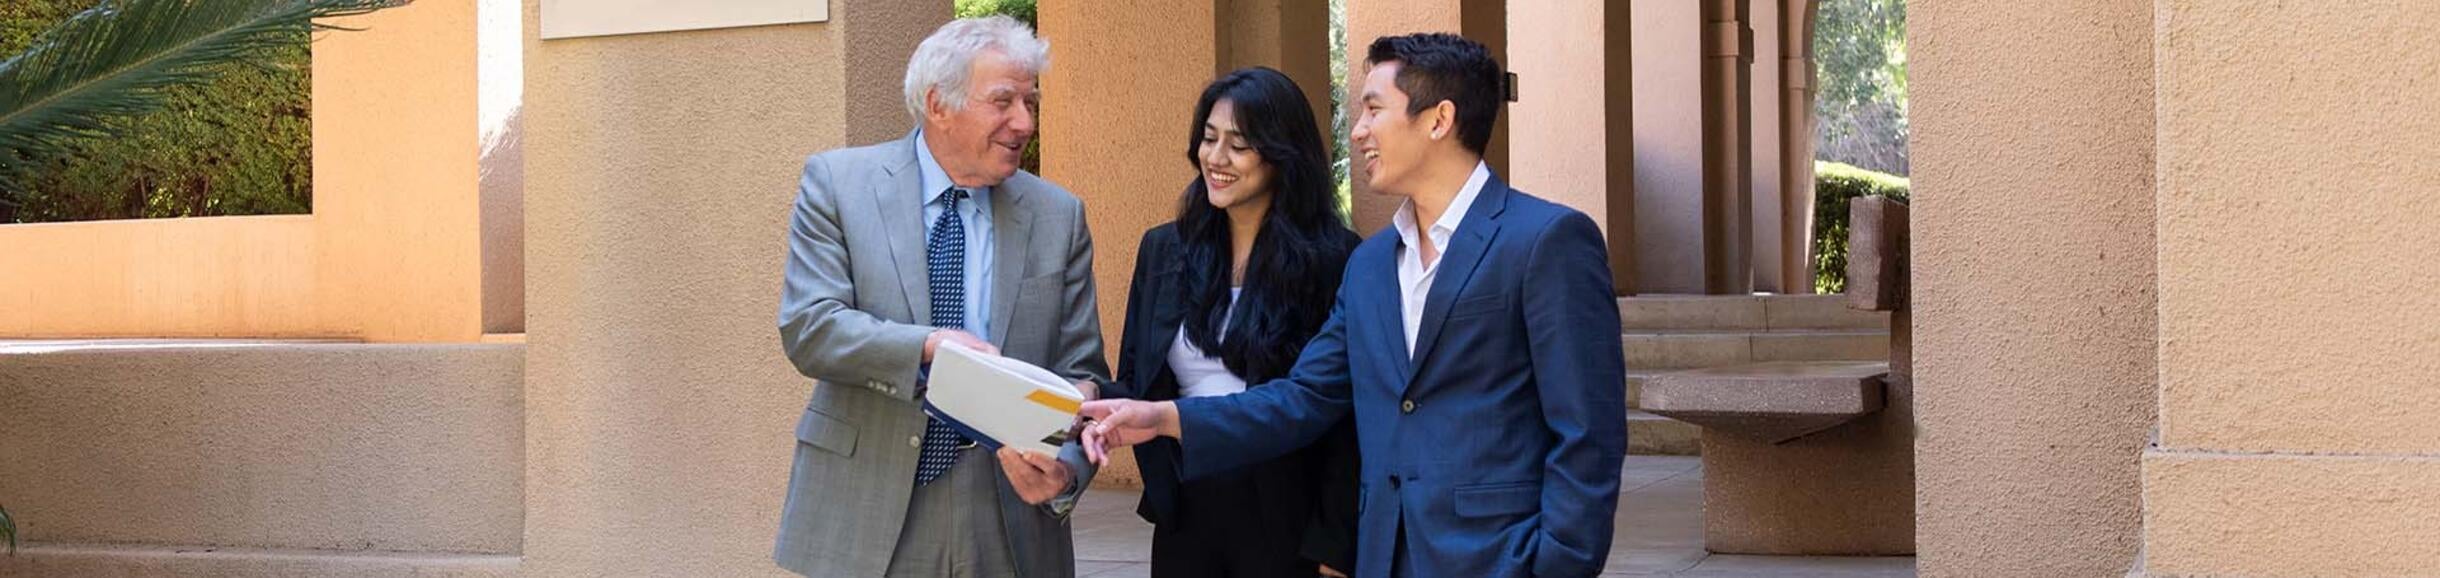 UCR School of Business professor and 2 students